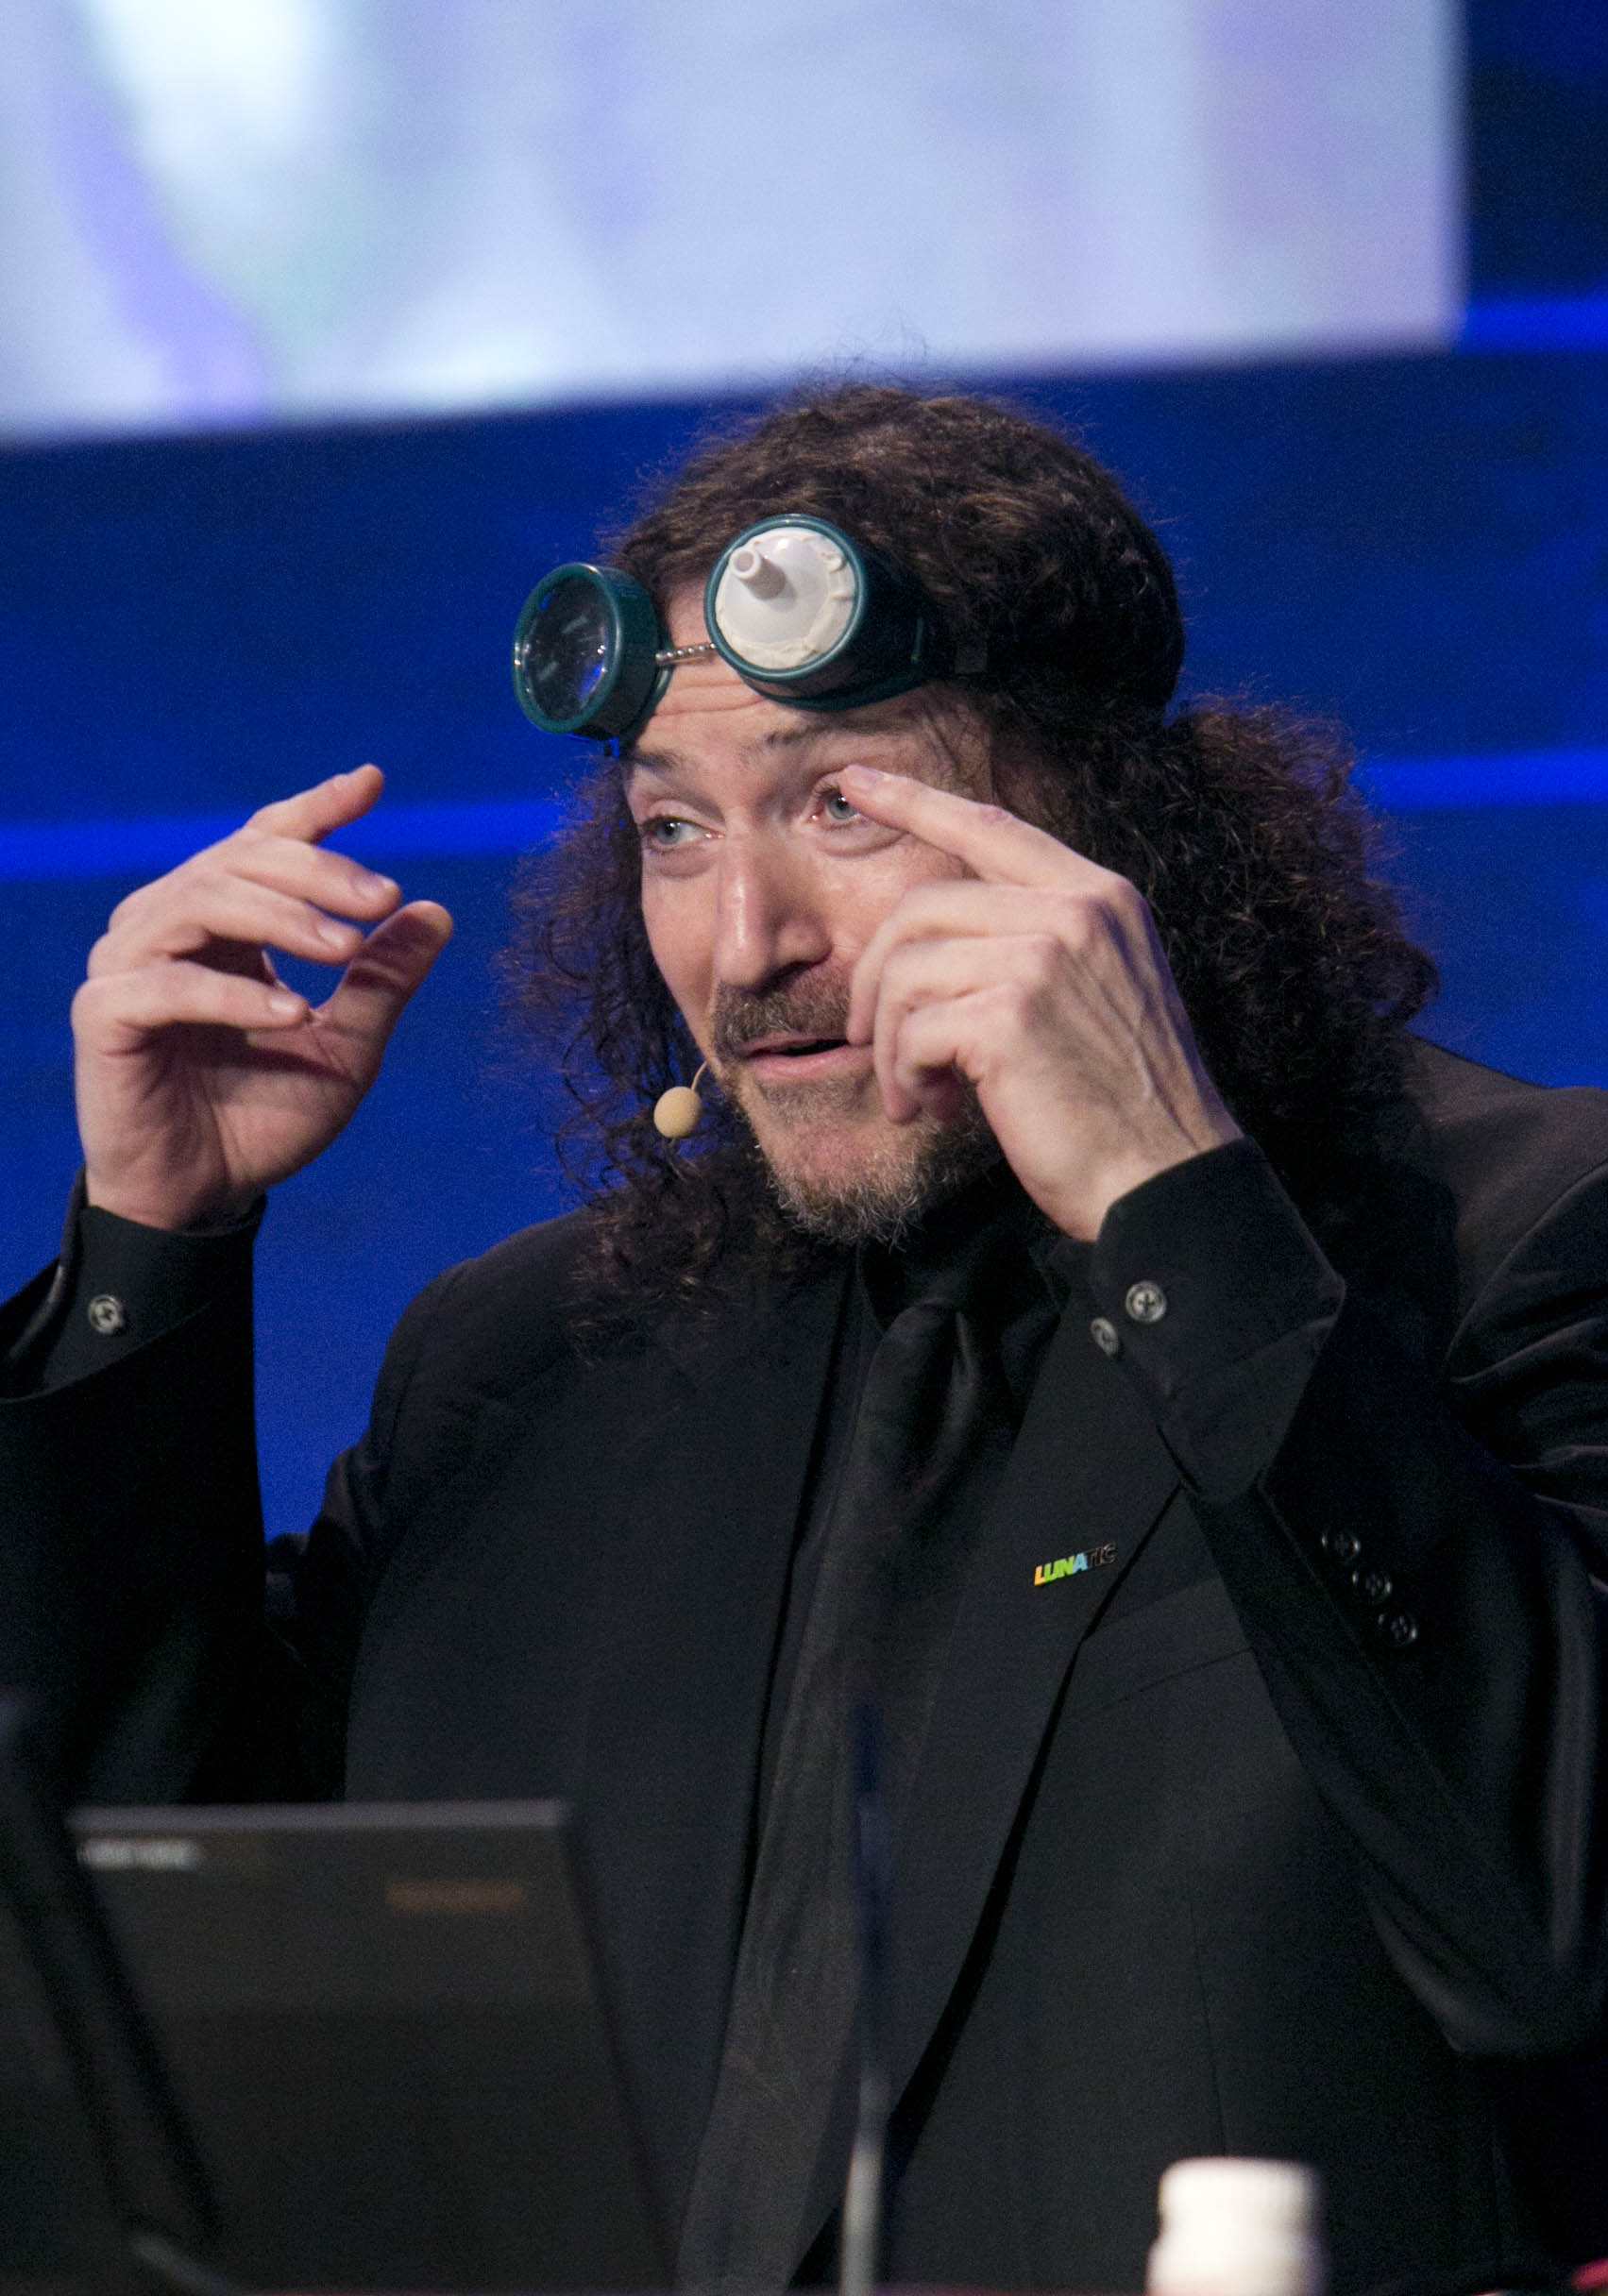 photo of David Berman wearing a microphone, speaking on stage wearing vision impairment simulation goggles on forehead